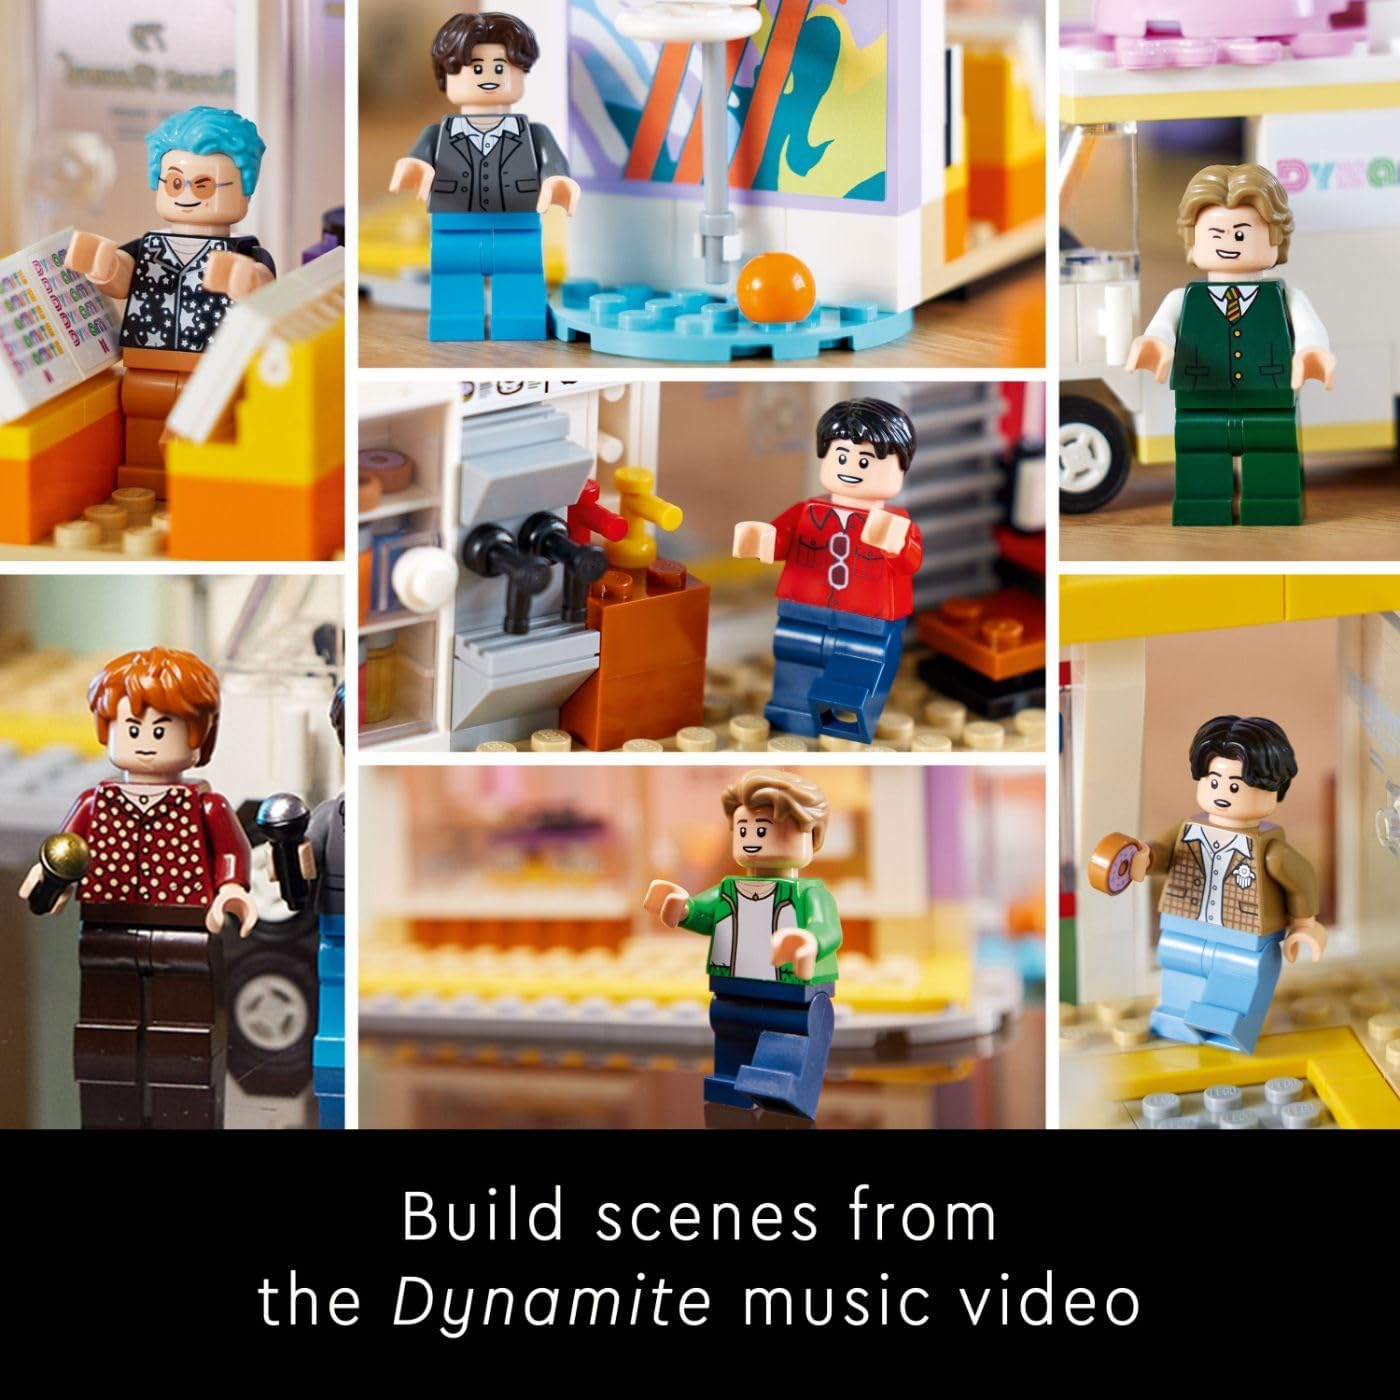 LEGO Ideas BTS Dynamite 21339 Model Kit for Adults, Gift Idea for BTS Fun with 7 Minifigures of The Famous K-pop Band, Features RM, Jin, SUGA, j-Hope, Jimin, V and Jung Kook